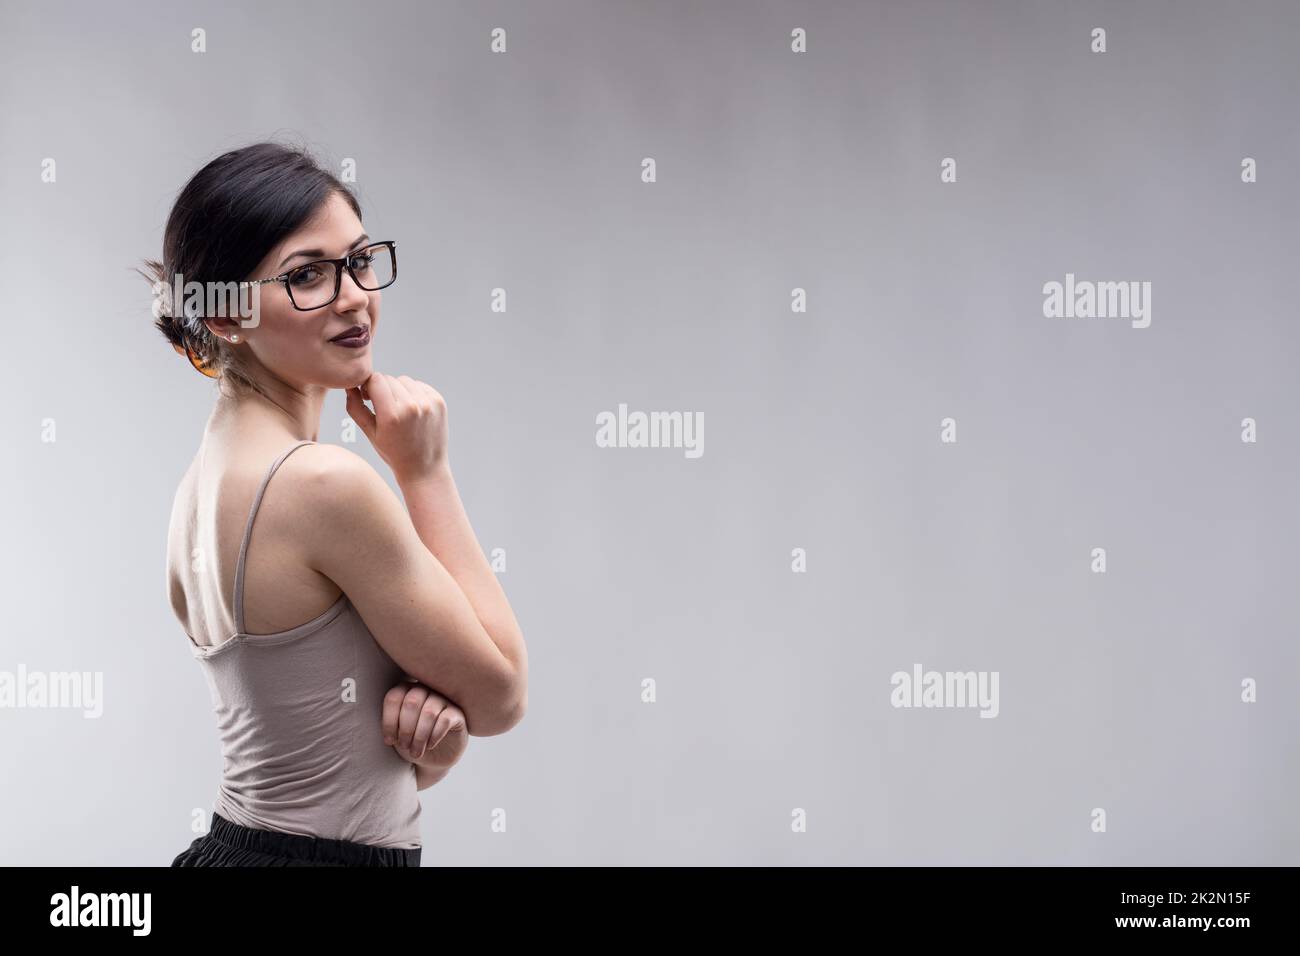 Beautiful woman looking over shoulder Stock Photo